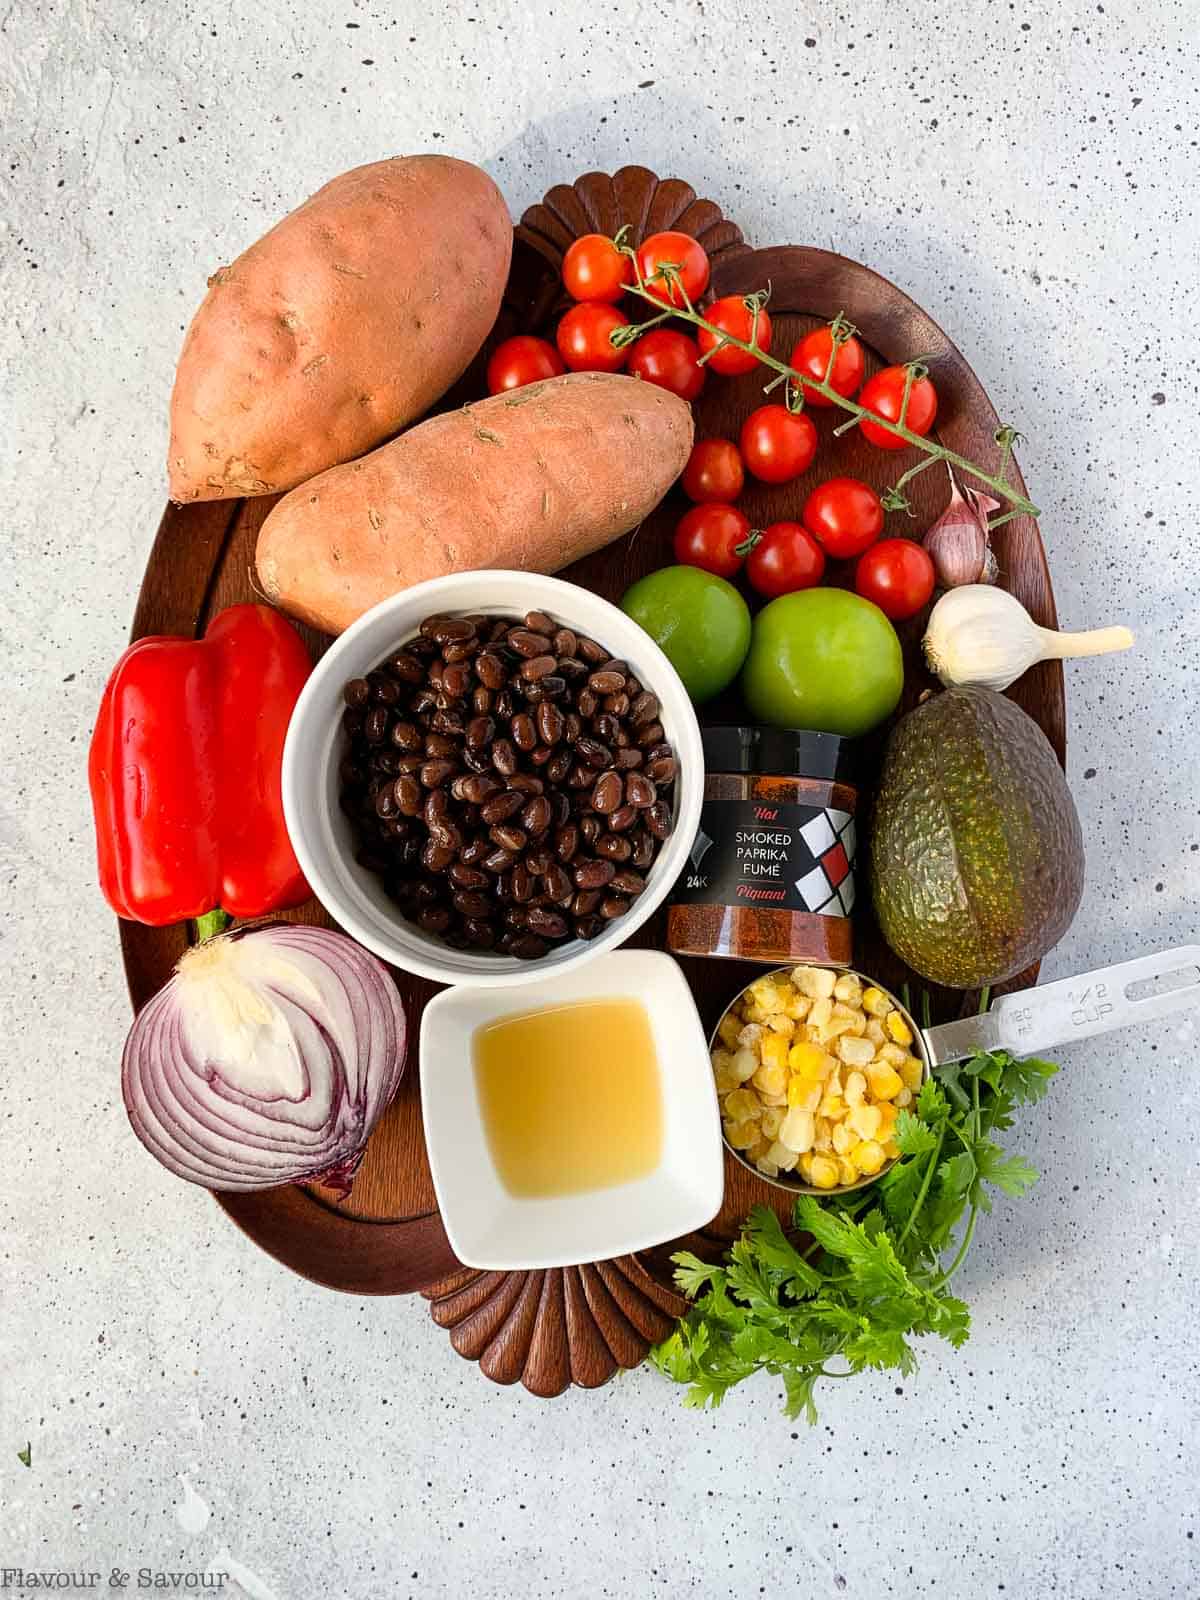 Ingredients for black bean stuffed sweet potatoes on a tray